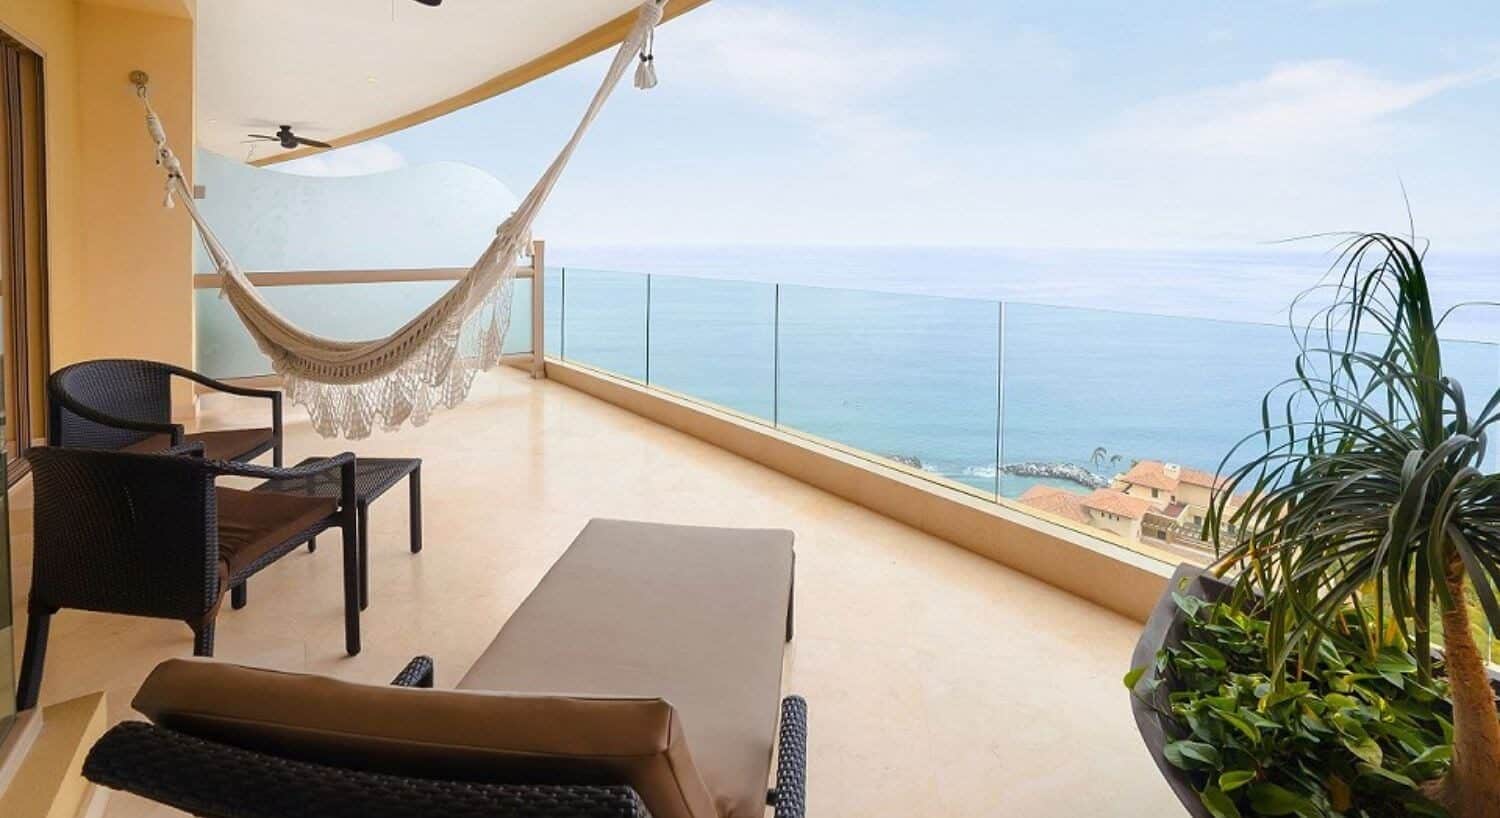 A private balcony high above the ocean with a lounge chair, patio furniture, a hammock, a planter with lush green plants, and sweeping ocean views and the tops of villas below.